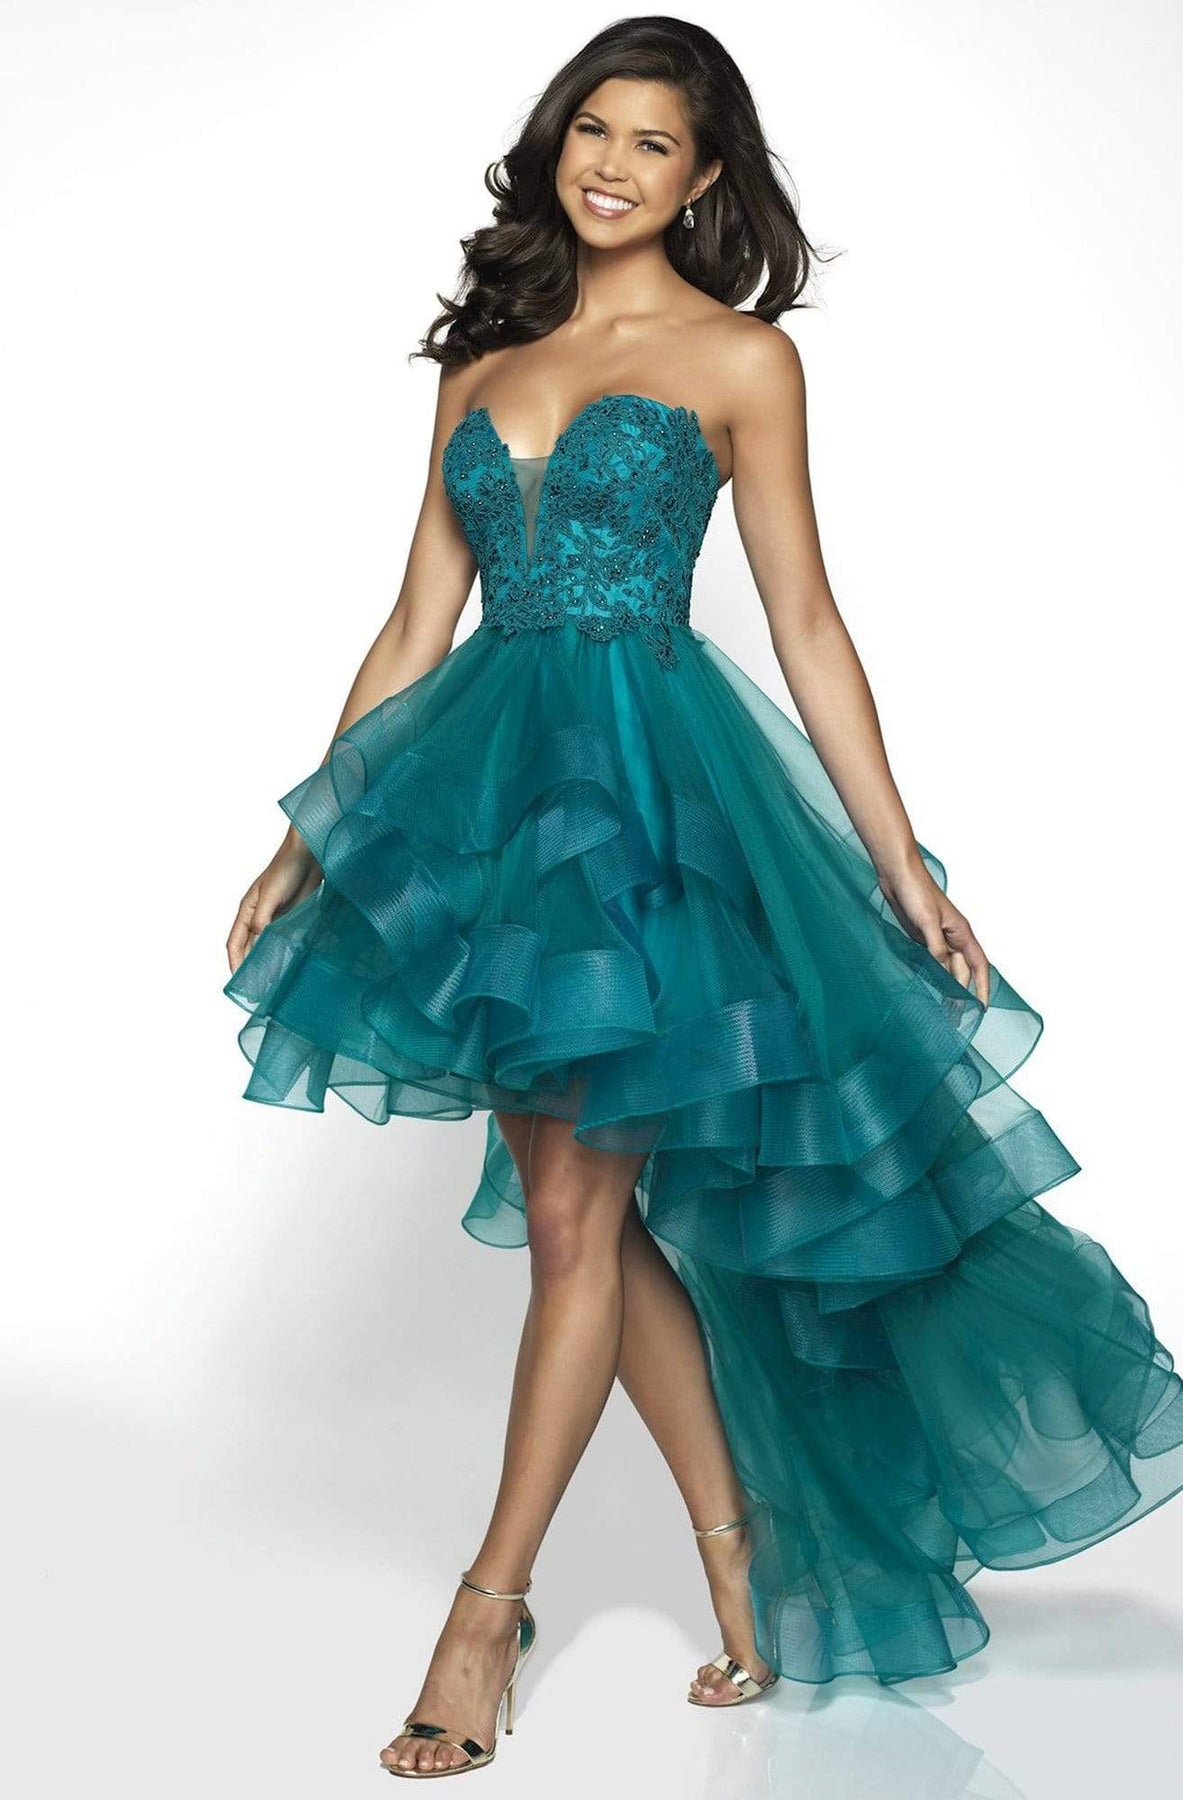 Blush by Alexia Designs - C2030 Plunging Appliqued High Low Gown Special Occasion Dress 0 / Teal